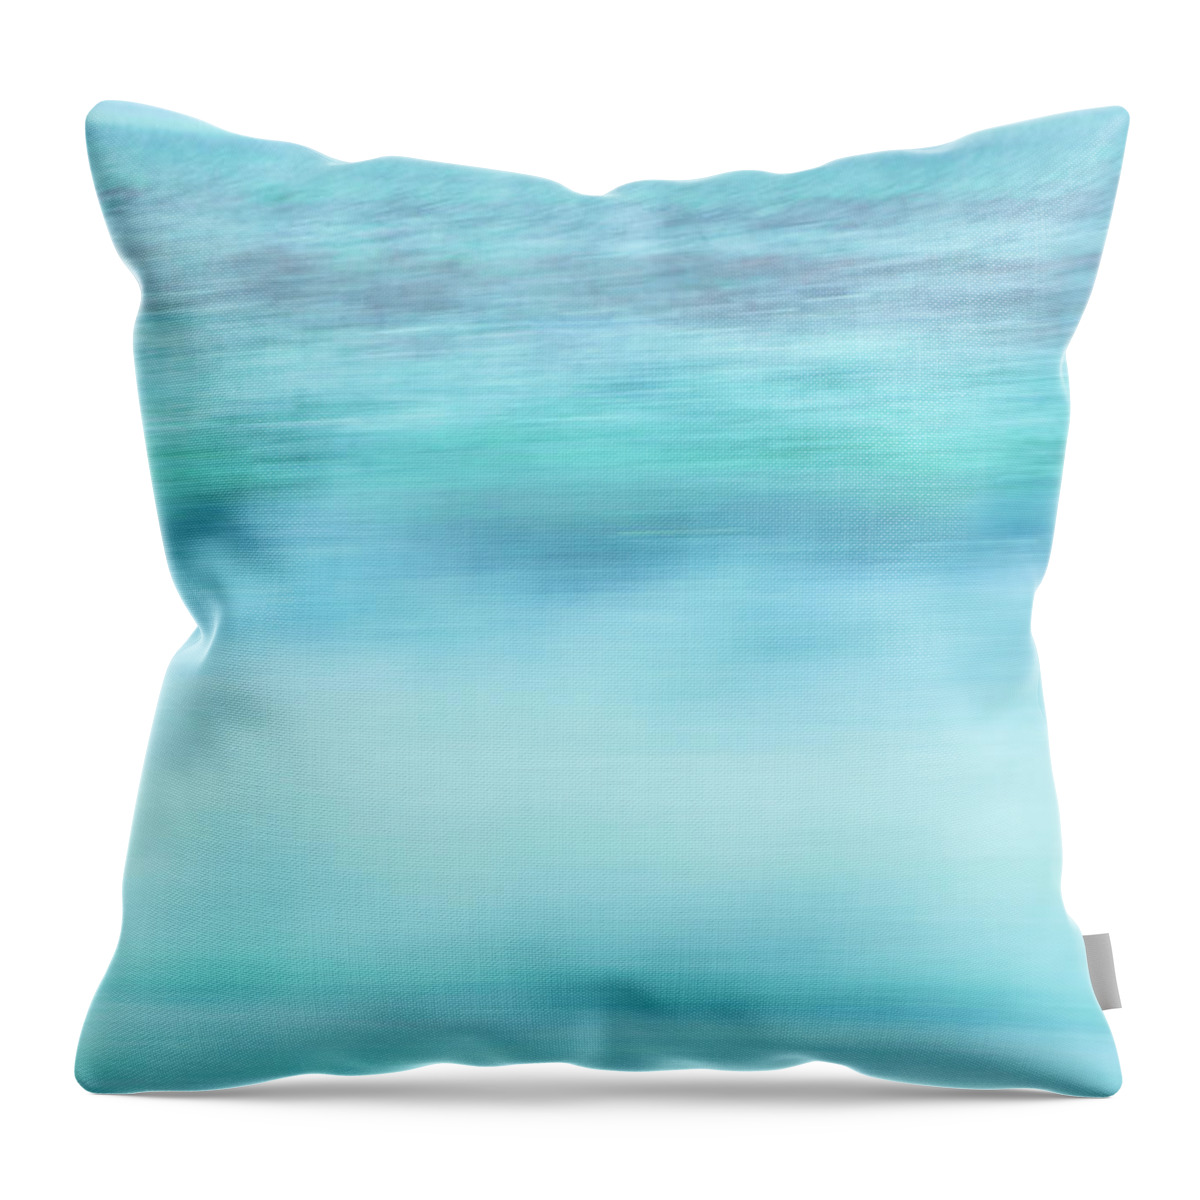 New Mexico Throw Pillow featuring the photograph Landwater Abstractions IV by Denise Dethlefsen